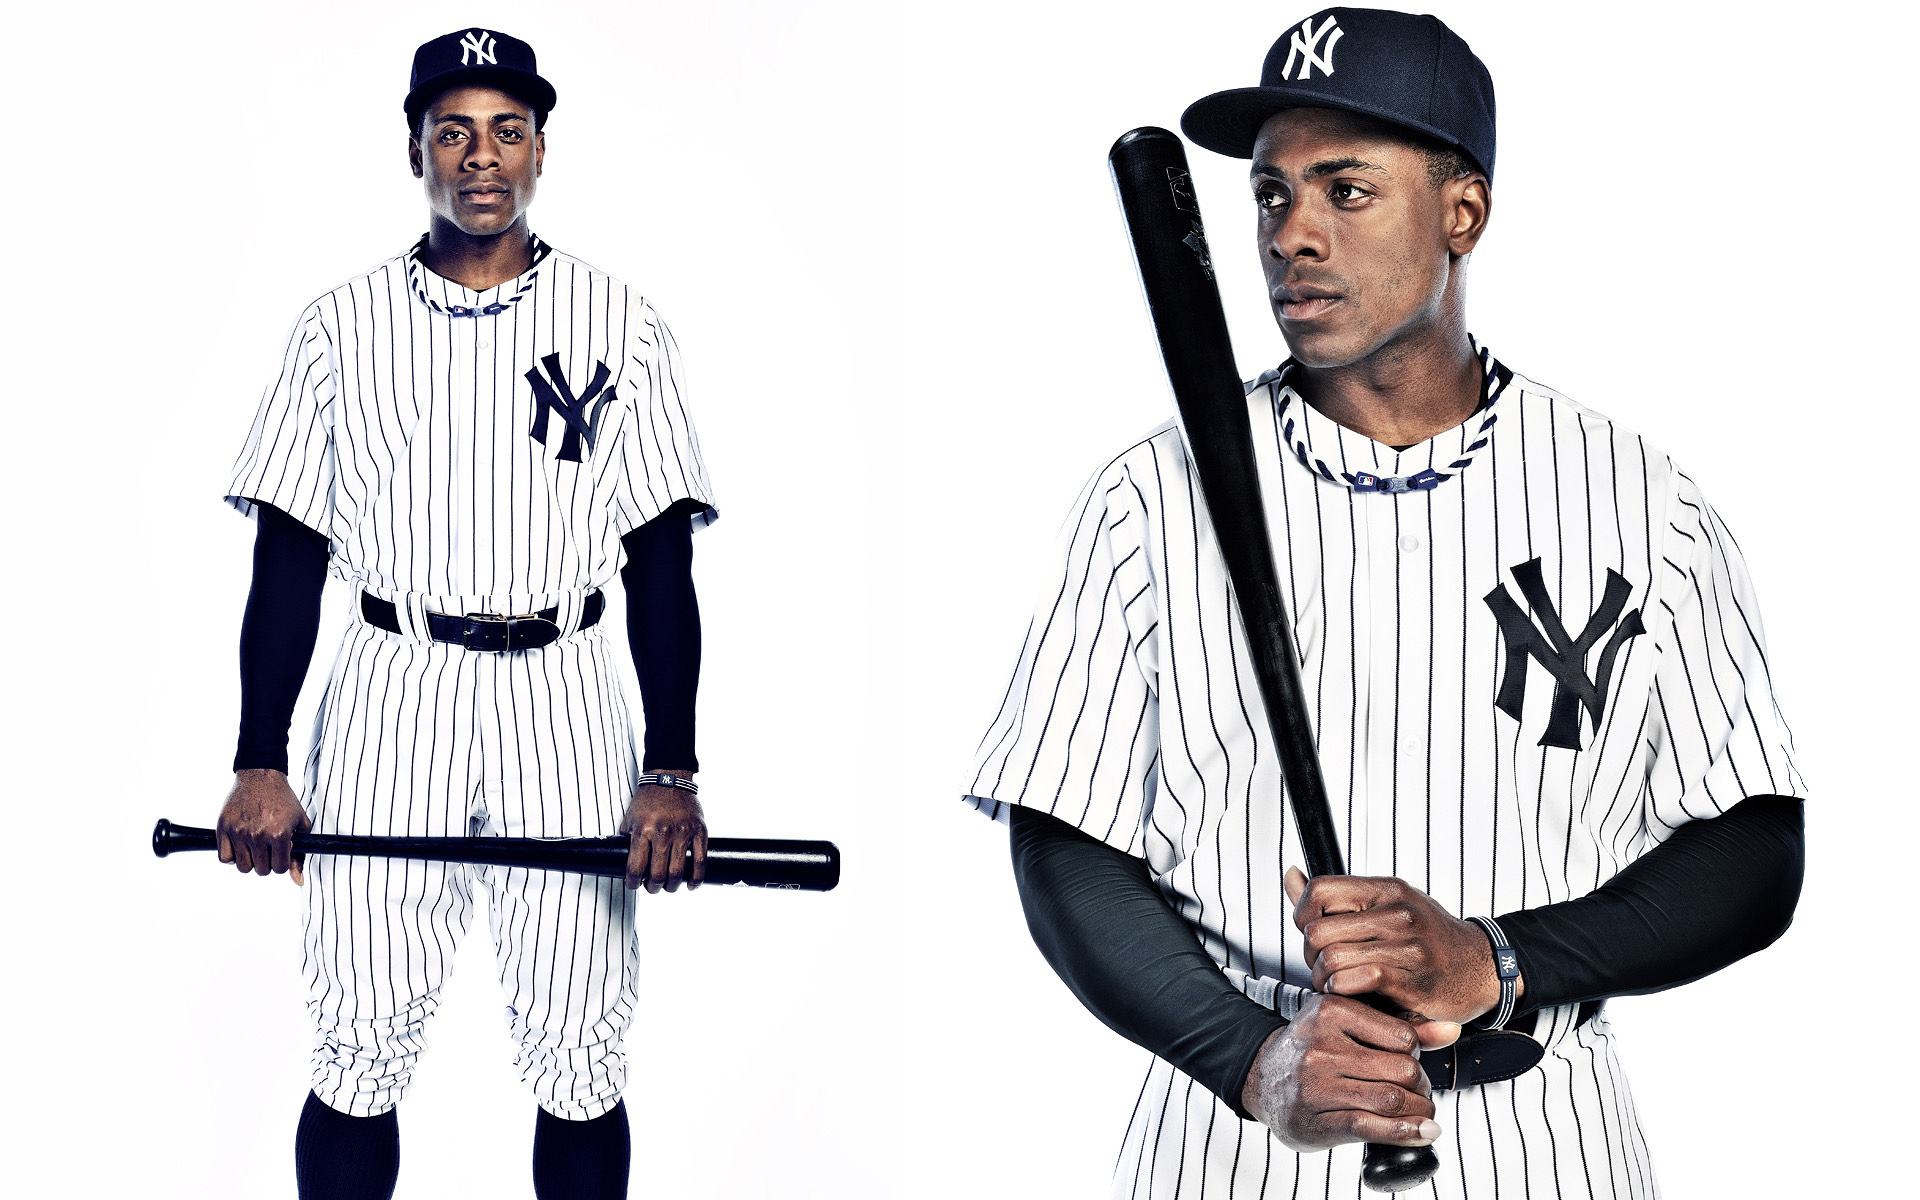 Curtis Granderson by Sports Photographer Blair Bunting